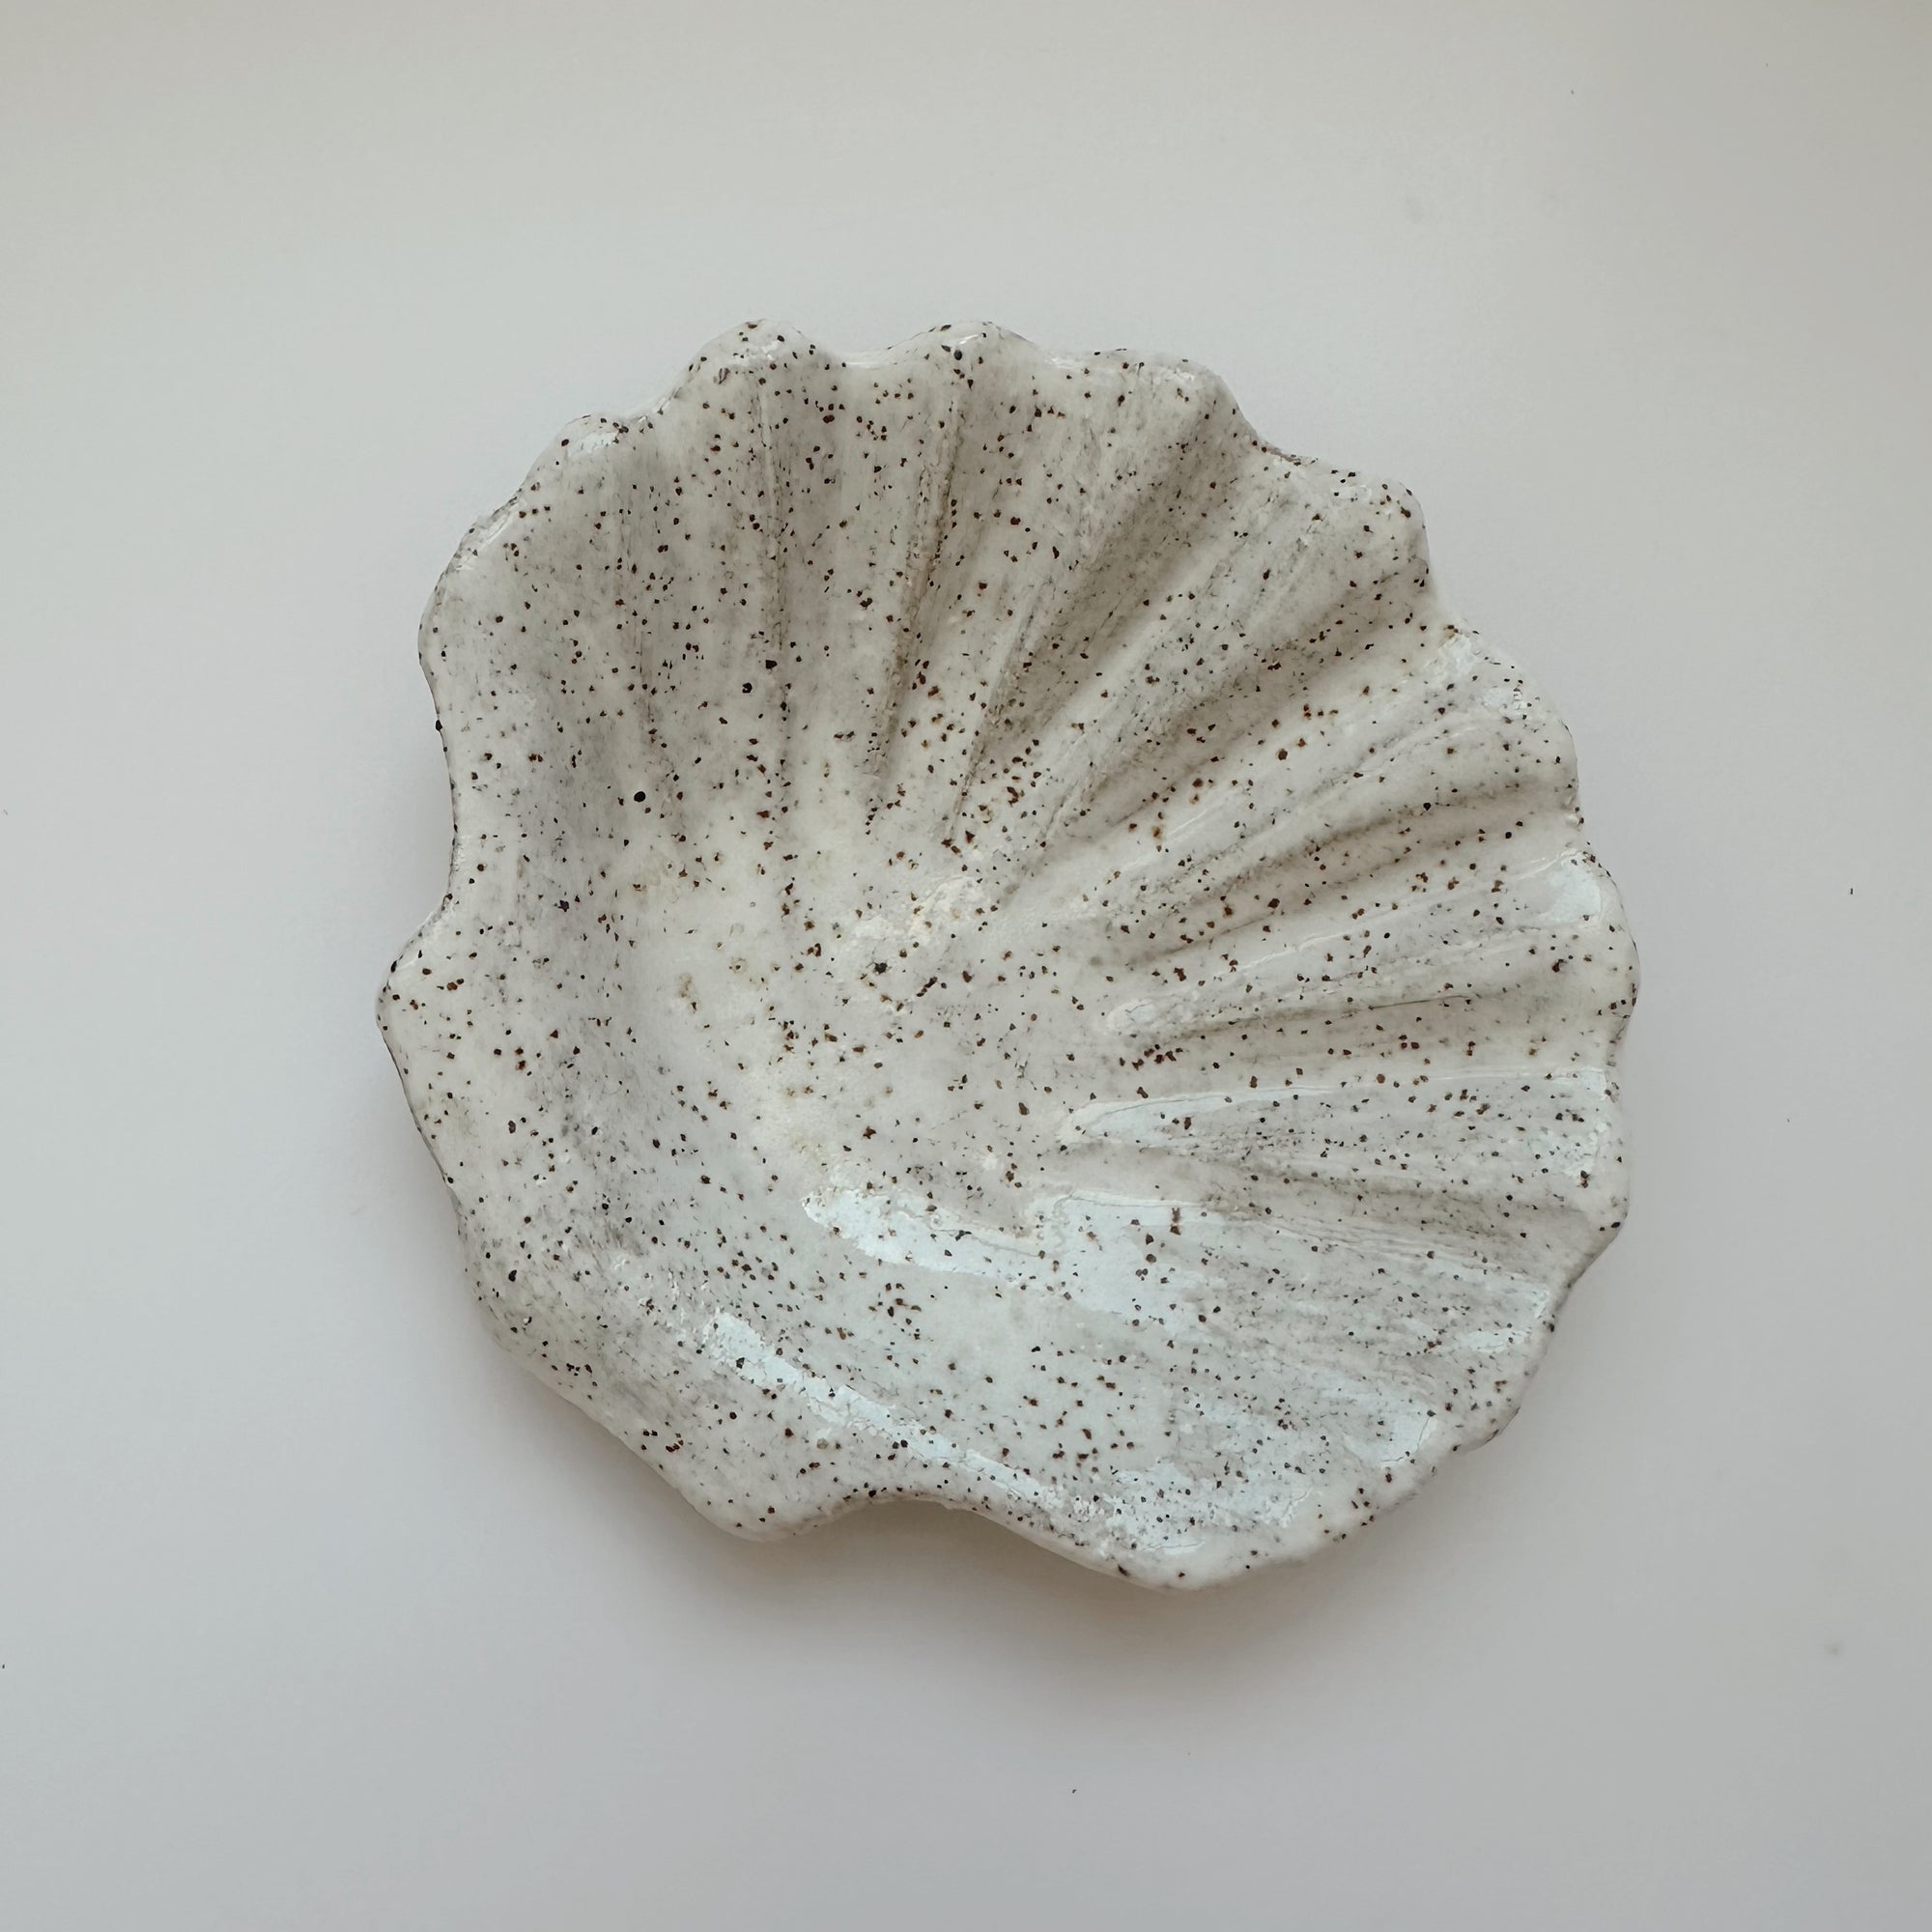 THE CLAY SOCIETY SHELL TRINKET DISH: SPECKLED WHITE